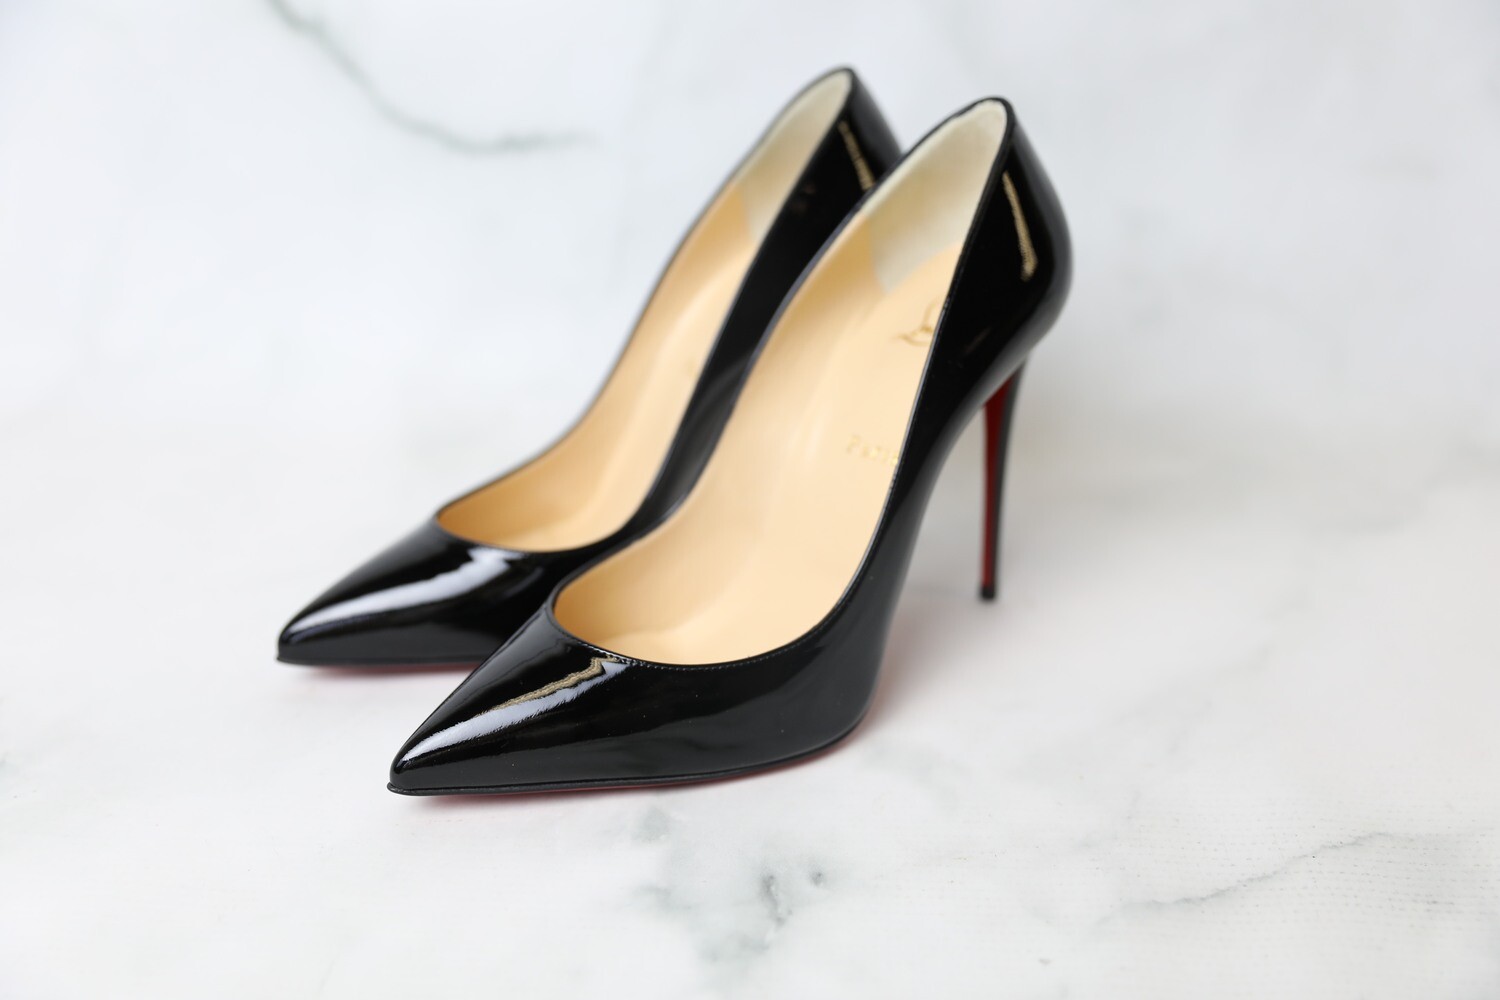 Christian Louboutin Shoes Pigalle Follies 100, Black Patent, Size 40.5 New  in Box WA001